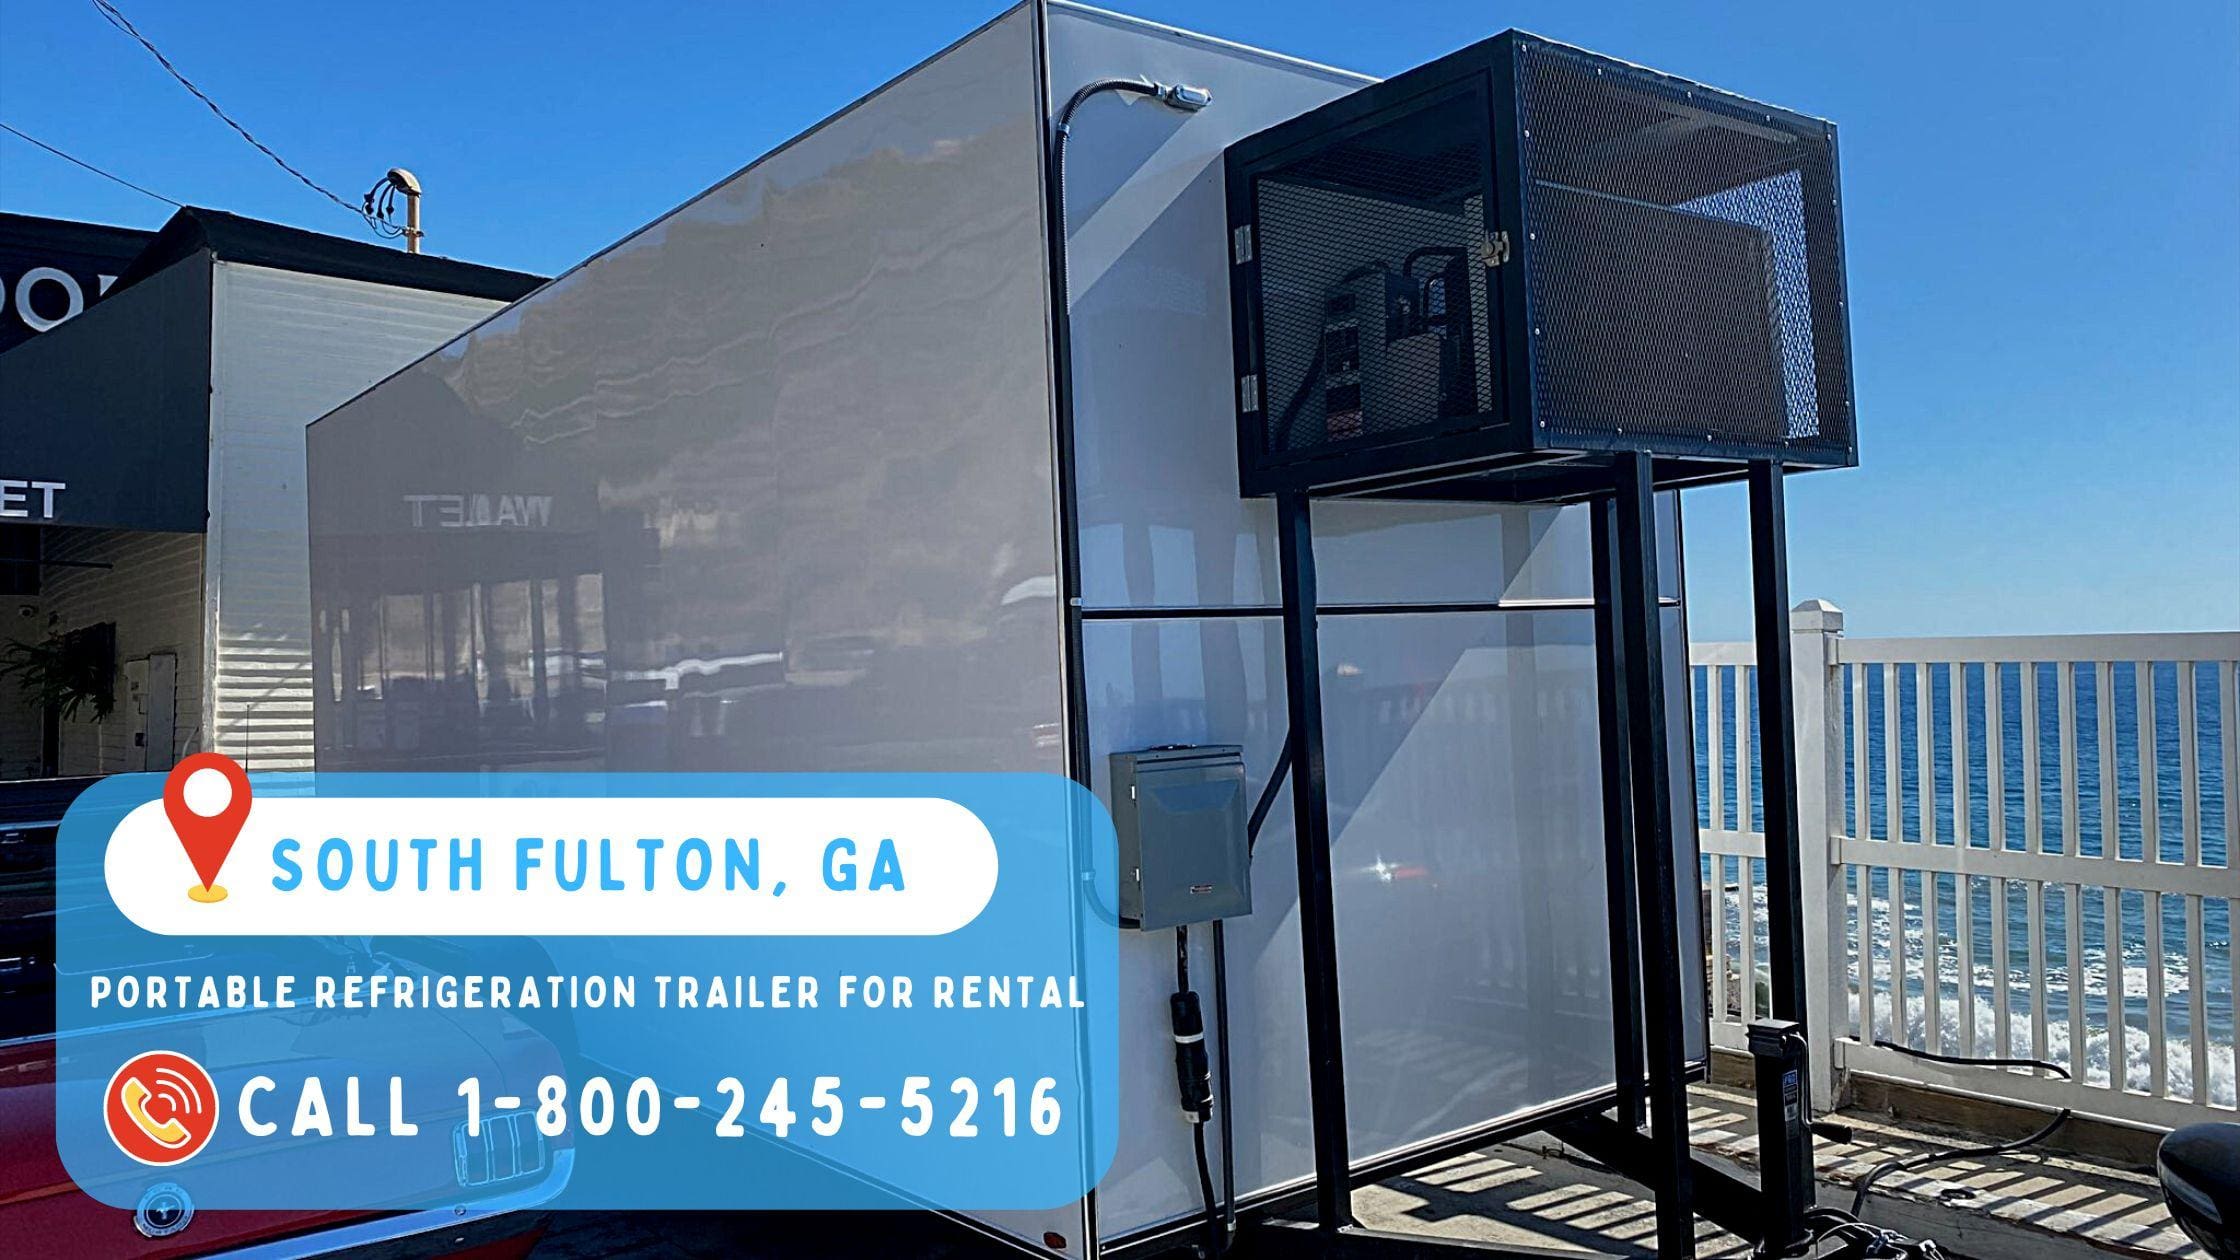 Portable Refrigeration Trailer for Rental in South Fulton